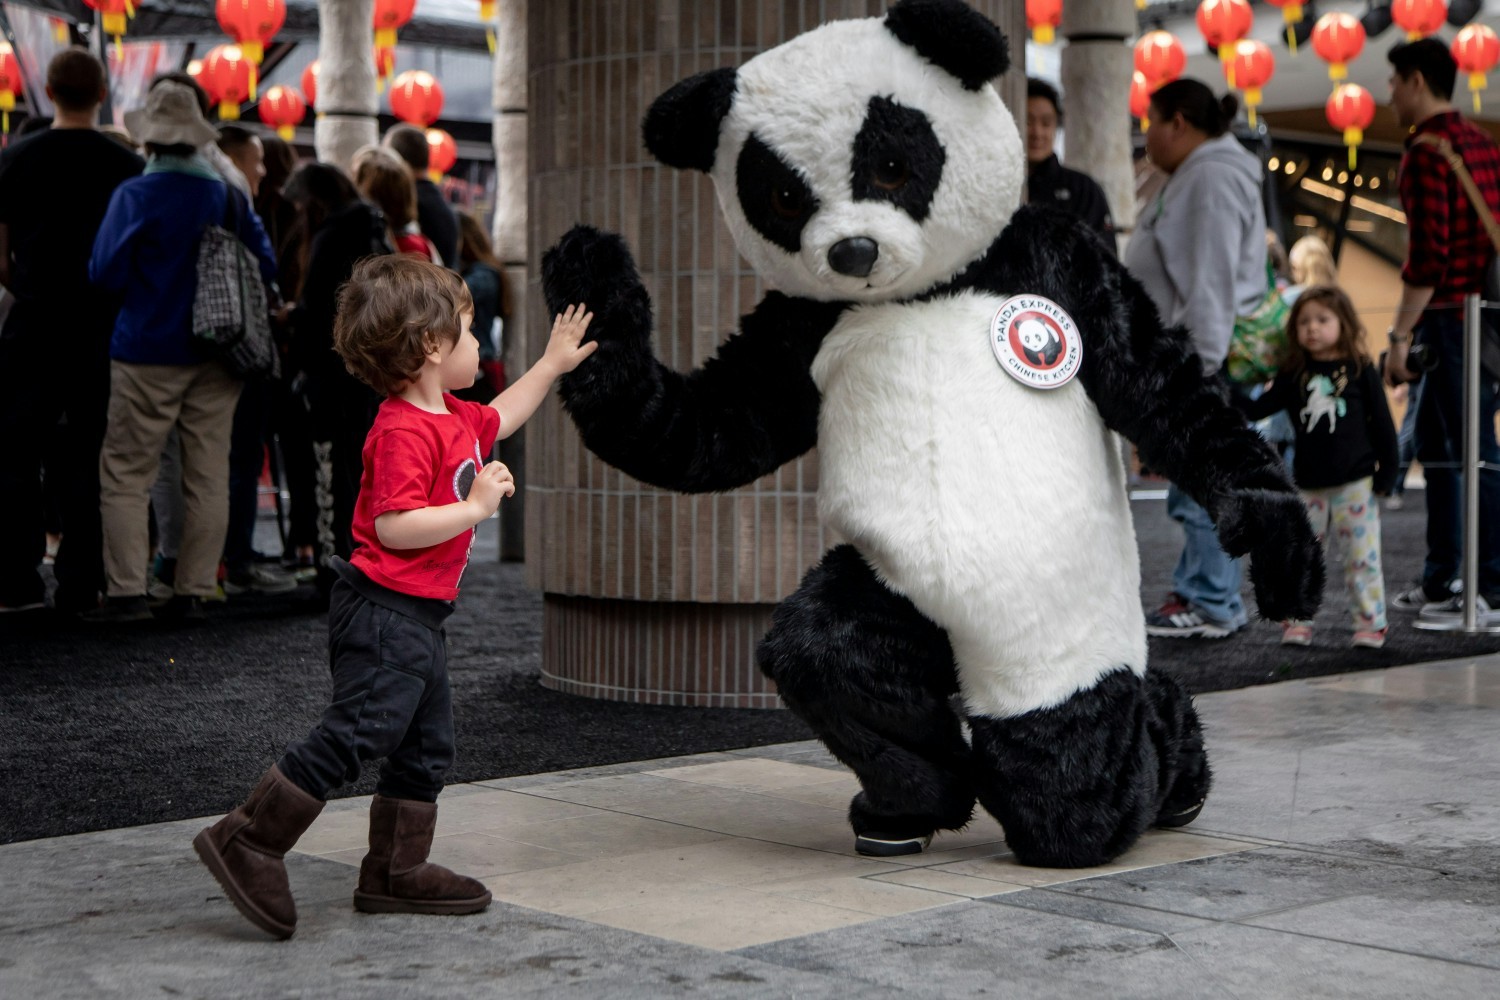 Panda is on a mission of inspiring better lives.